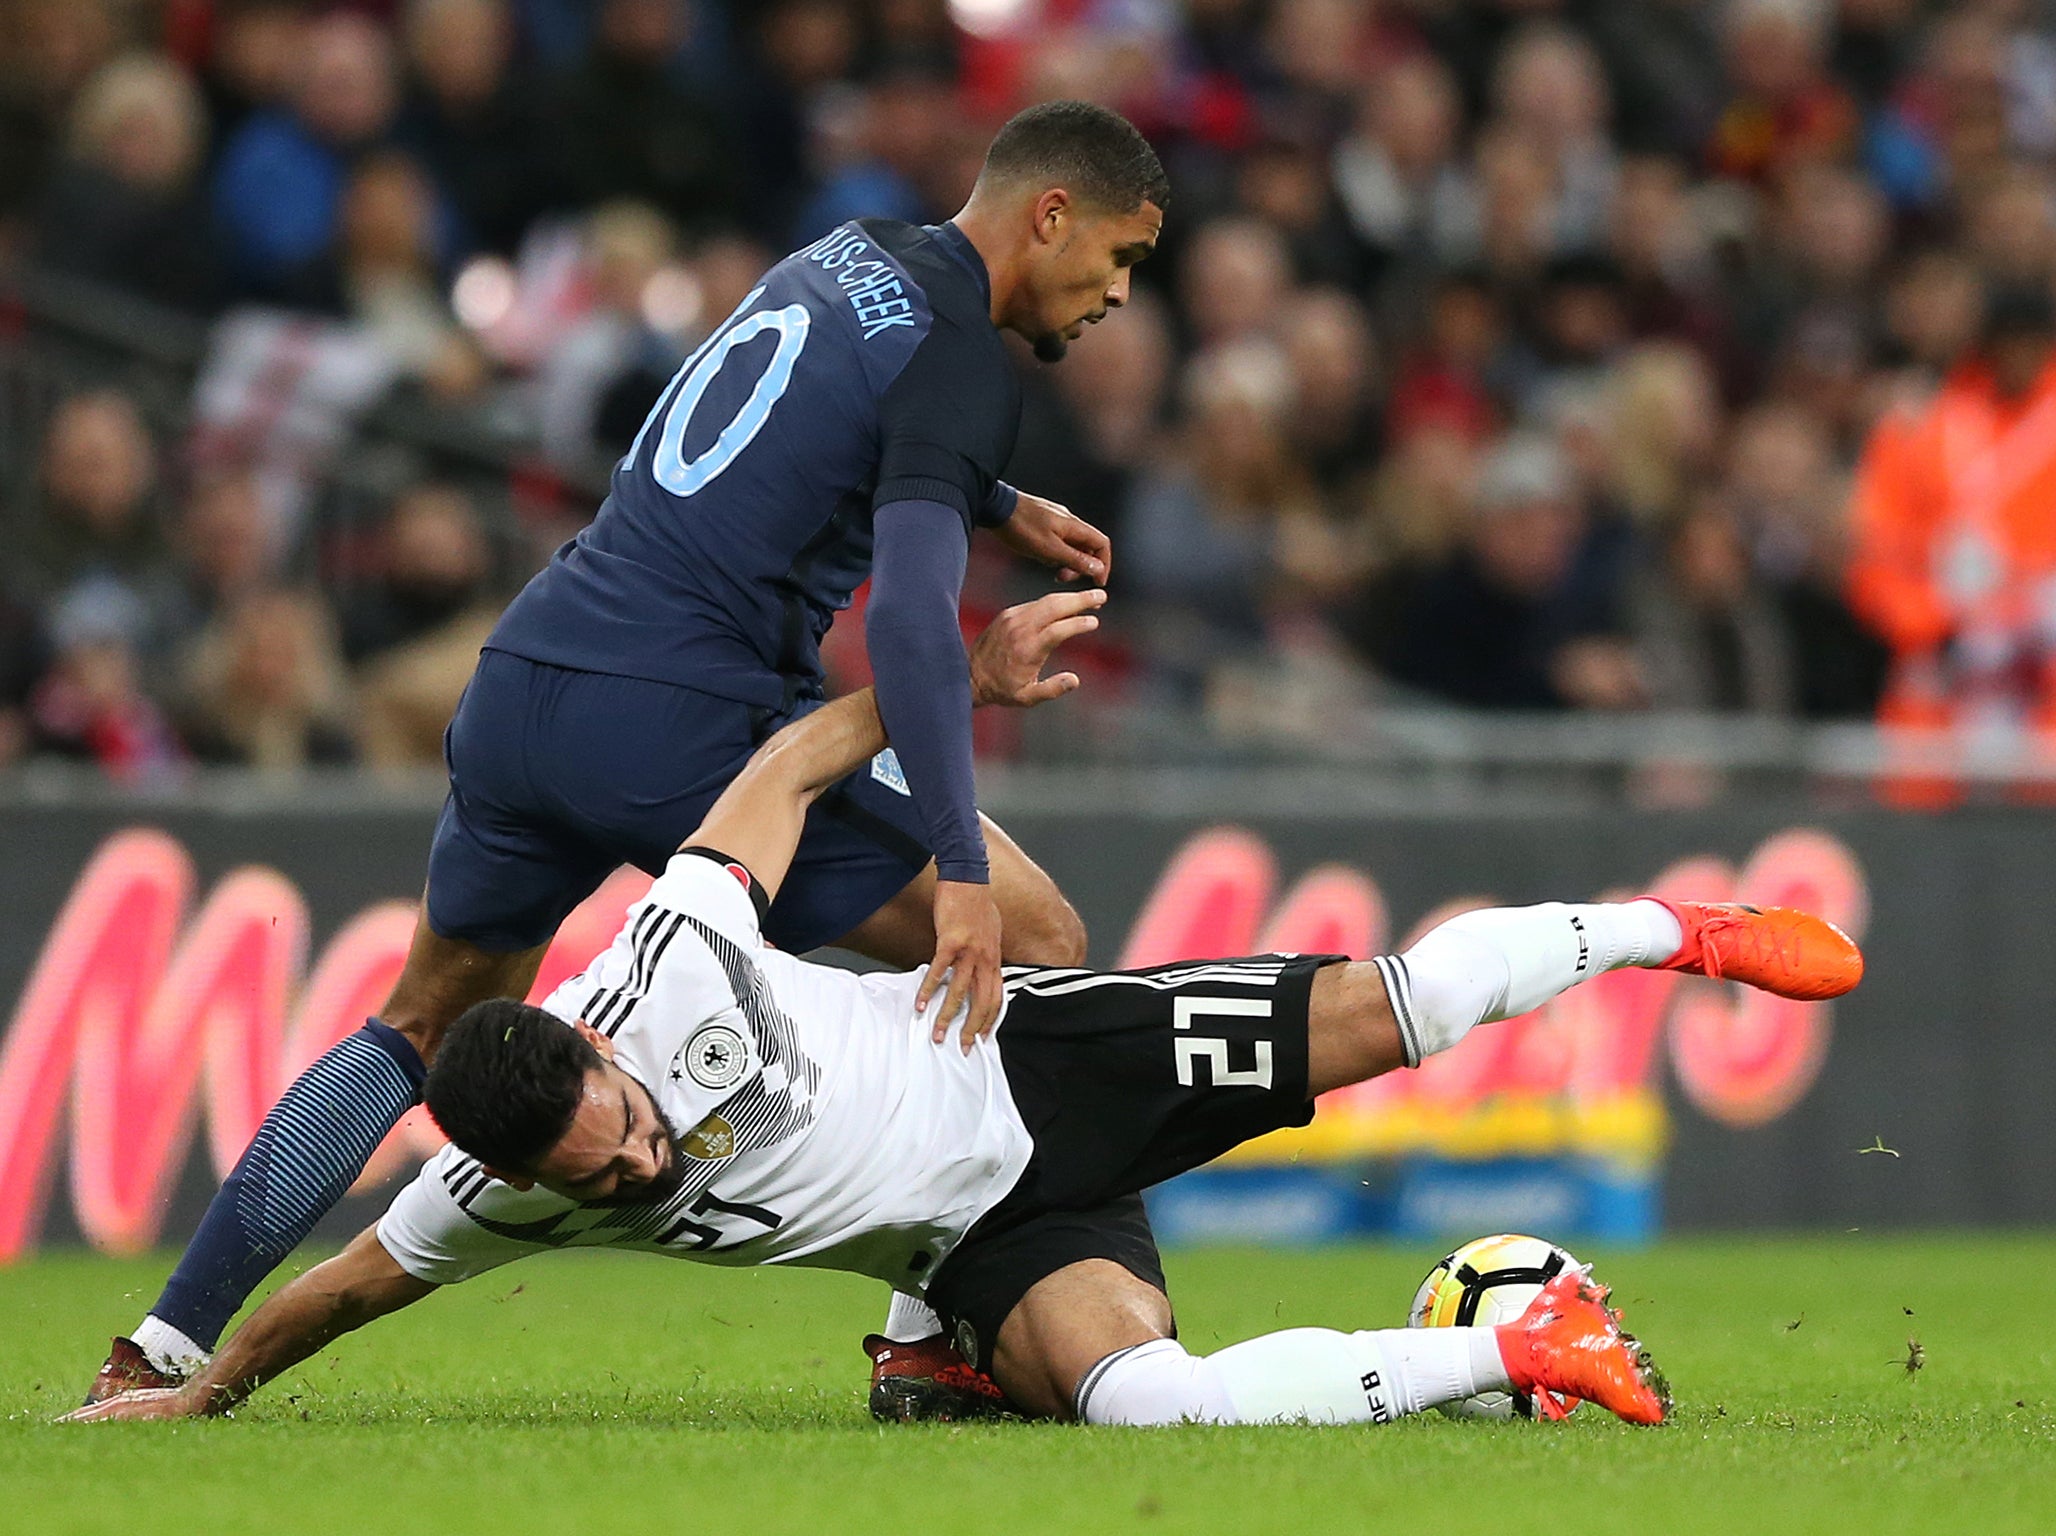 Ruben Loftus-Cheek&apos;s display against Germany the most positive thing to come from a shrug of an evening